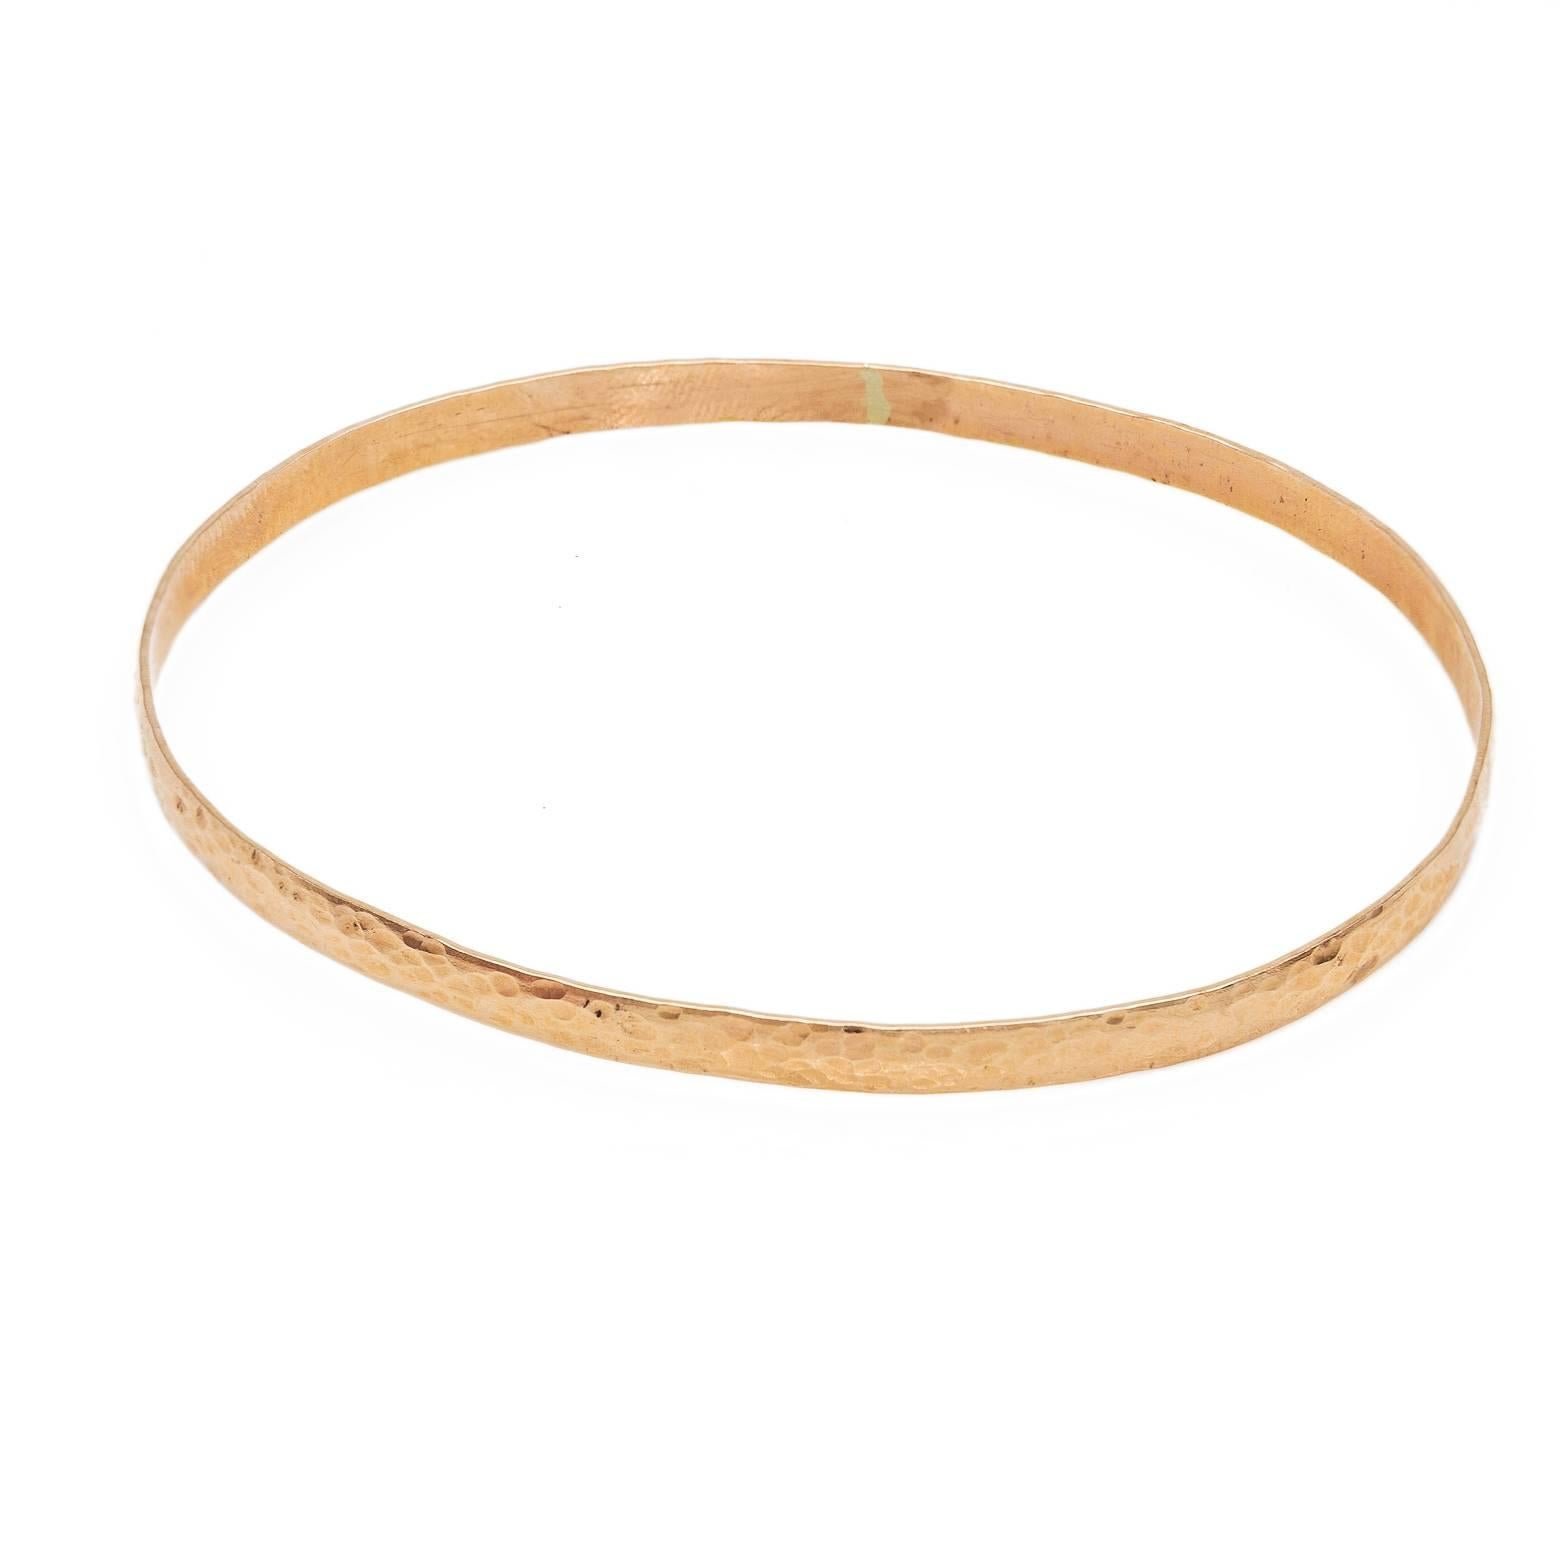 This oval bangle with the hammered texture is a wonderful bracelet to wear alone or stack with your collection. The hammered texture adds sparkle and depth.